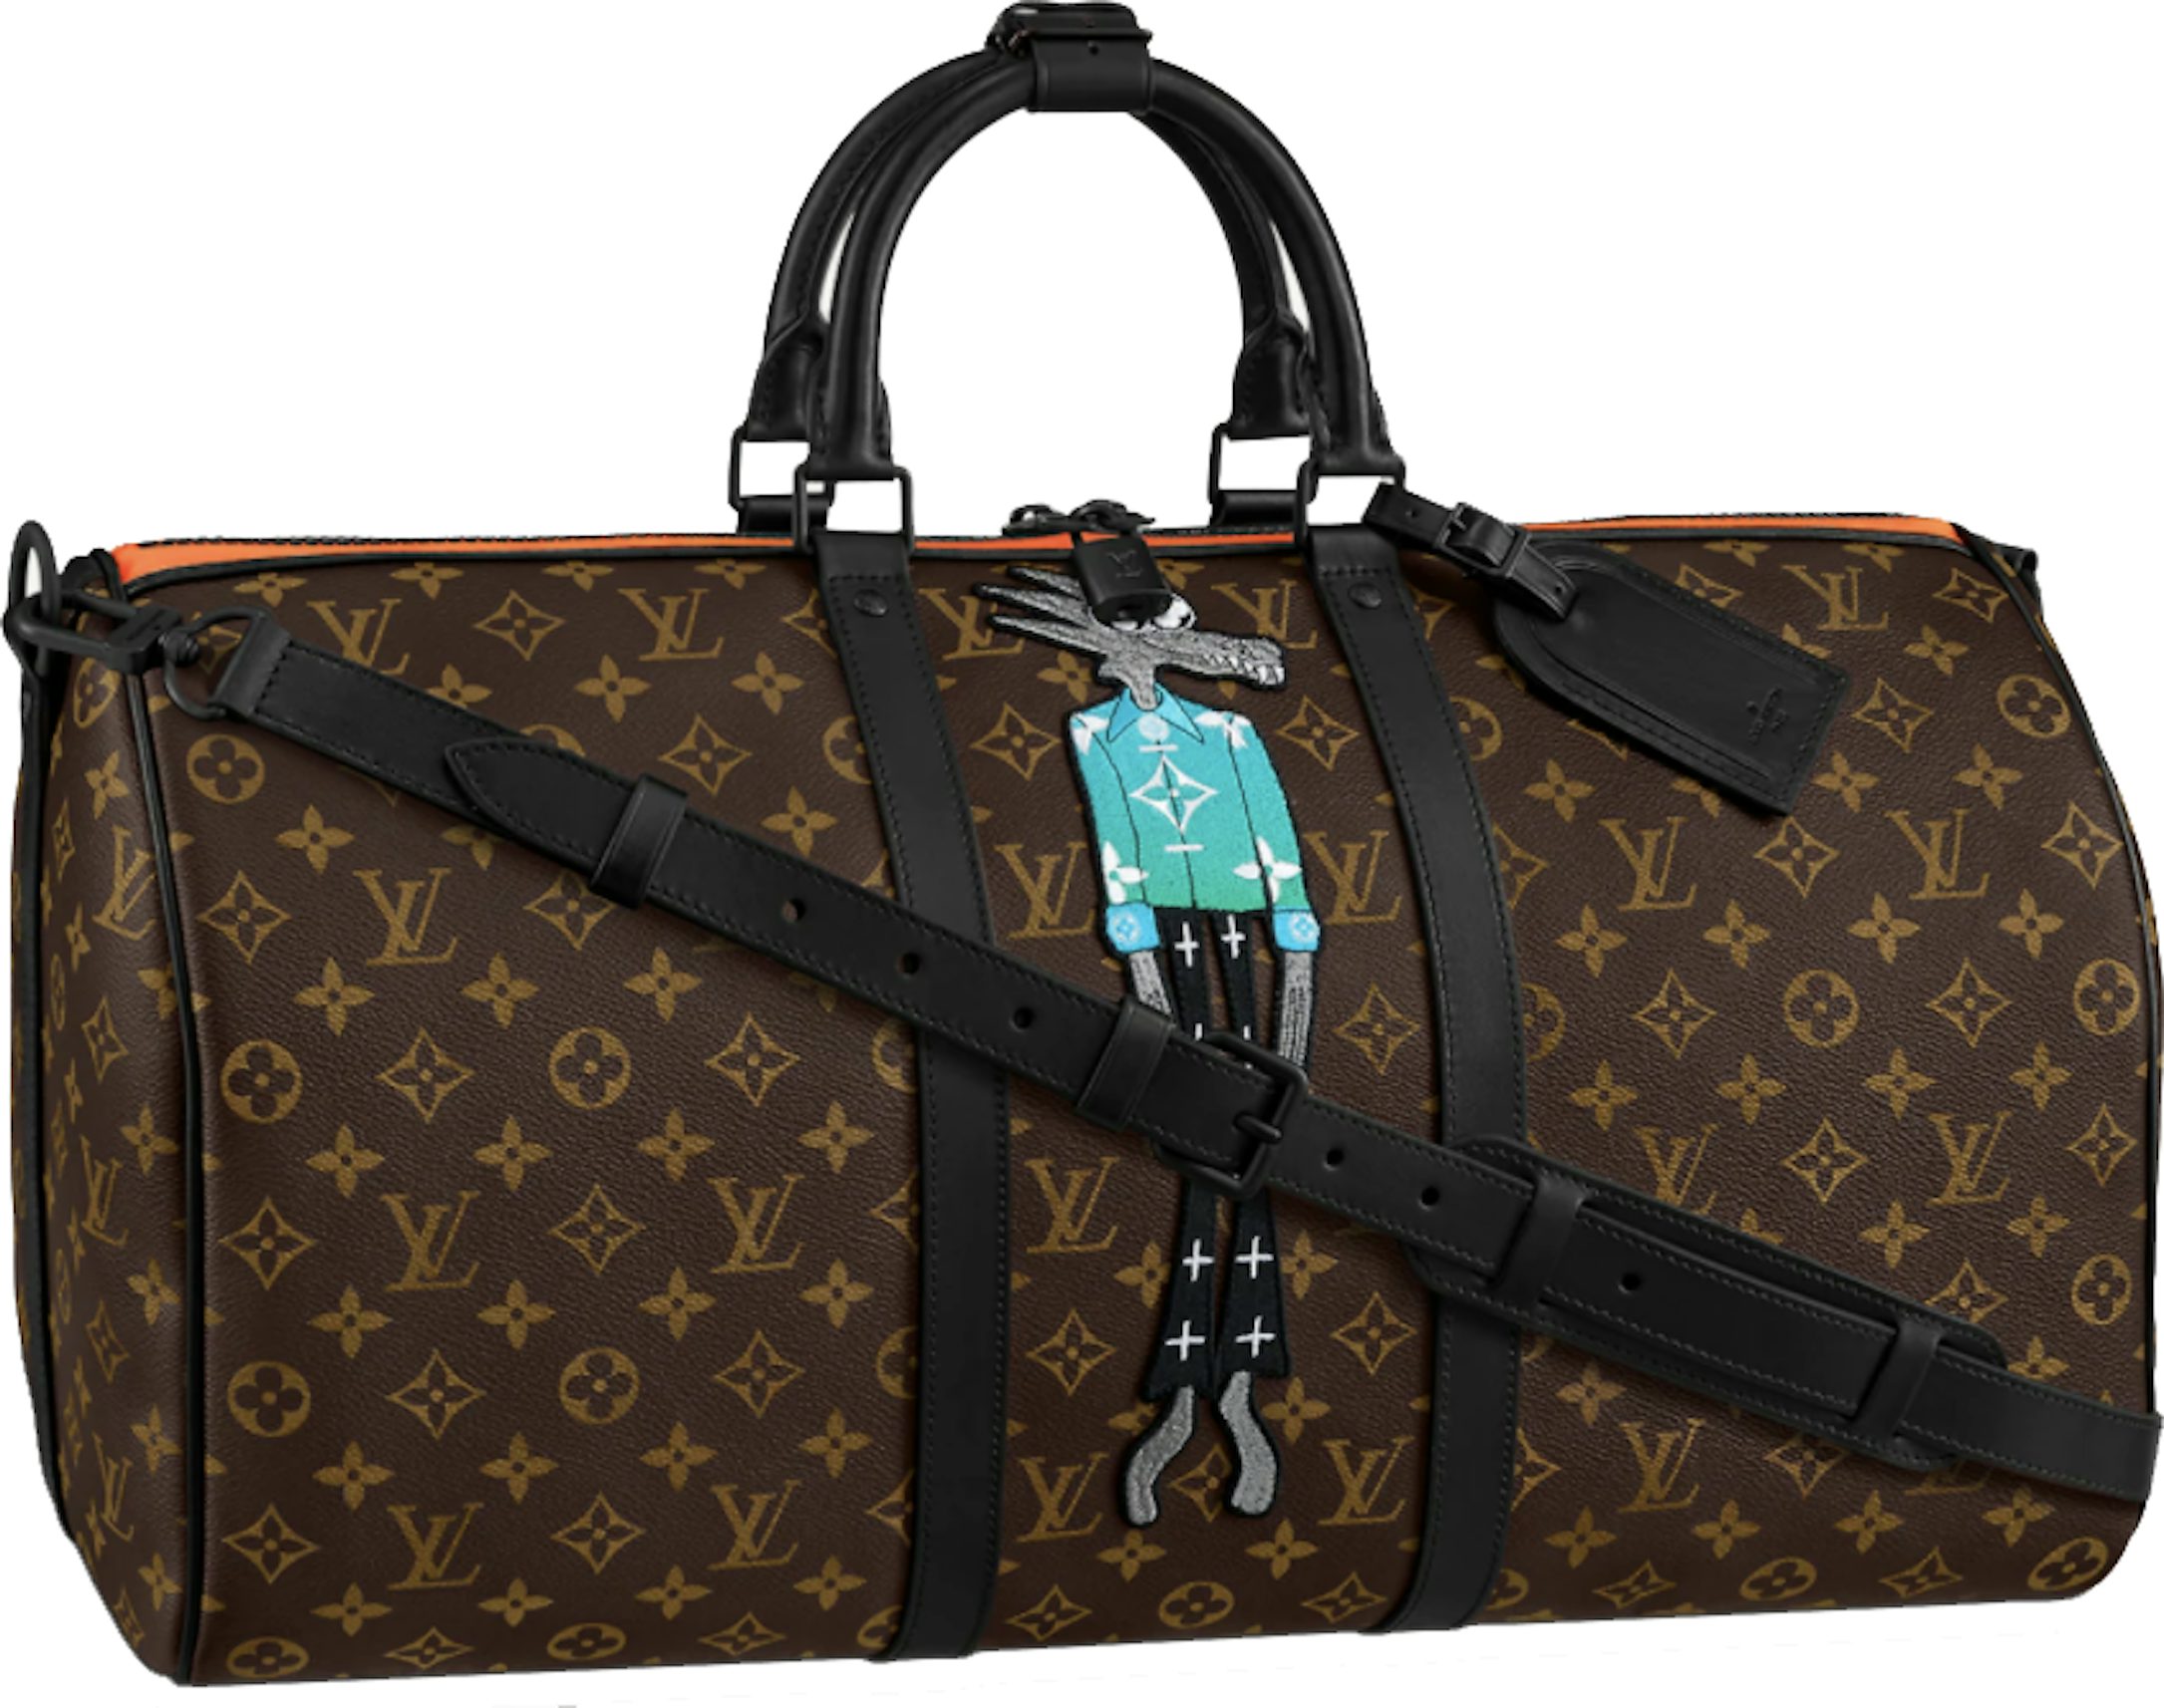 Louis Vuitton Keepall Bandouliere 50 Monogram Blue in Coated Canvas - GB